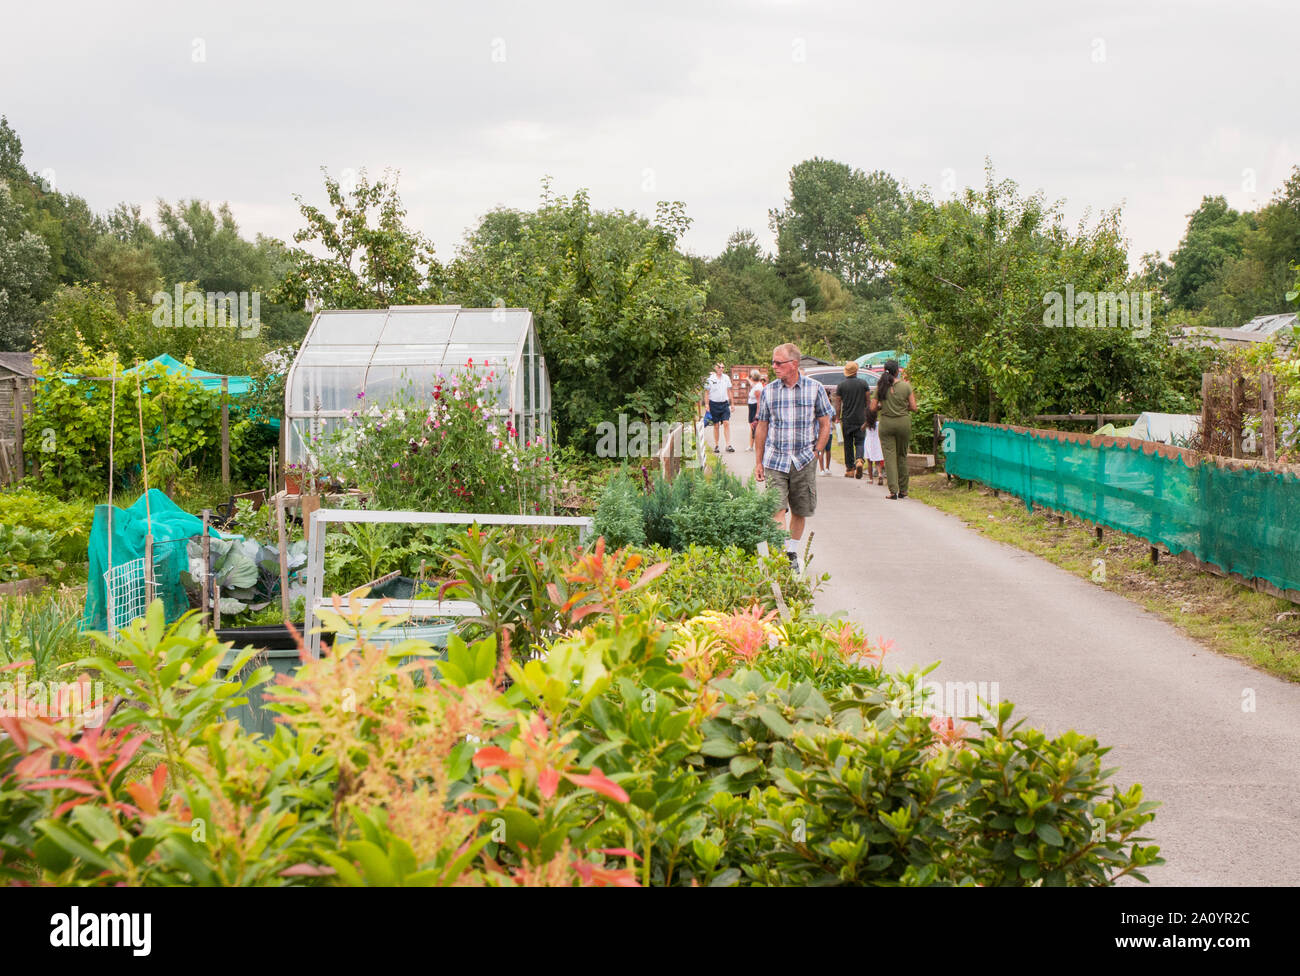 Members of the general puplic attending an open day on an allotment site.  People walking along road looking at various sites and plots Stock Photo